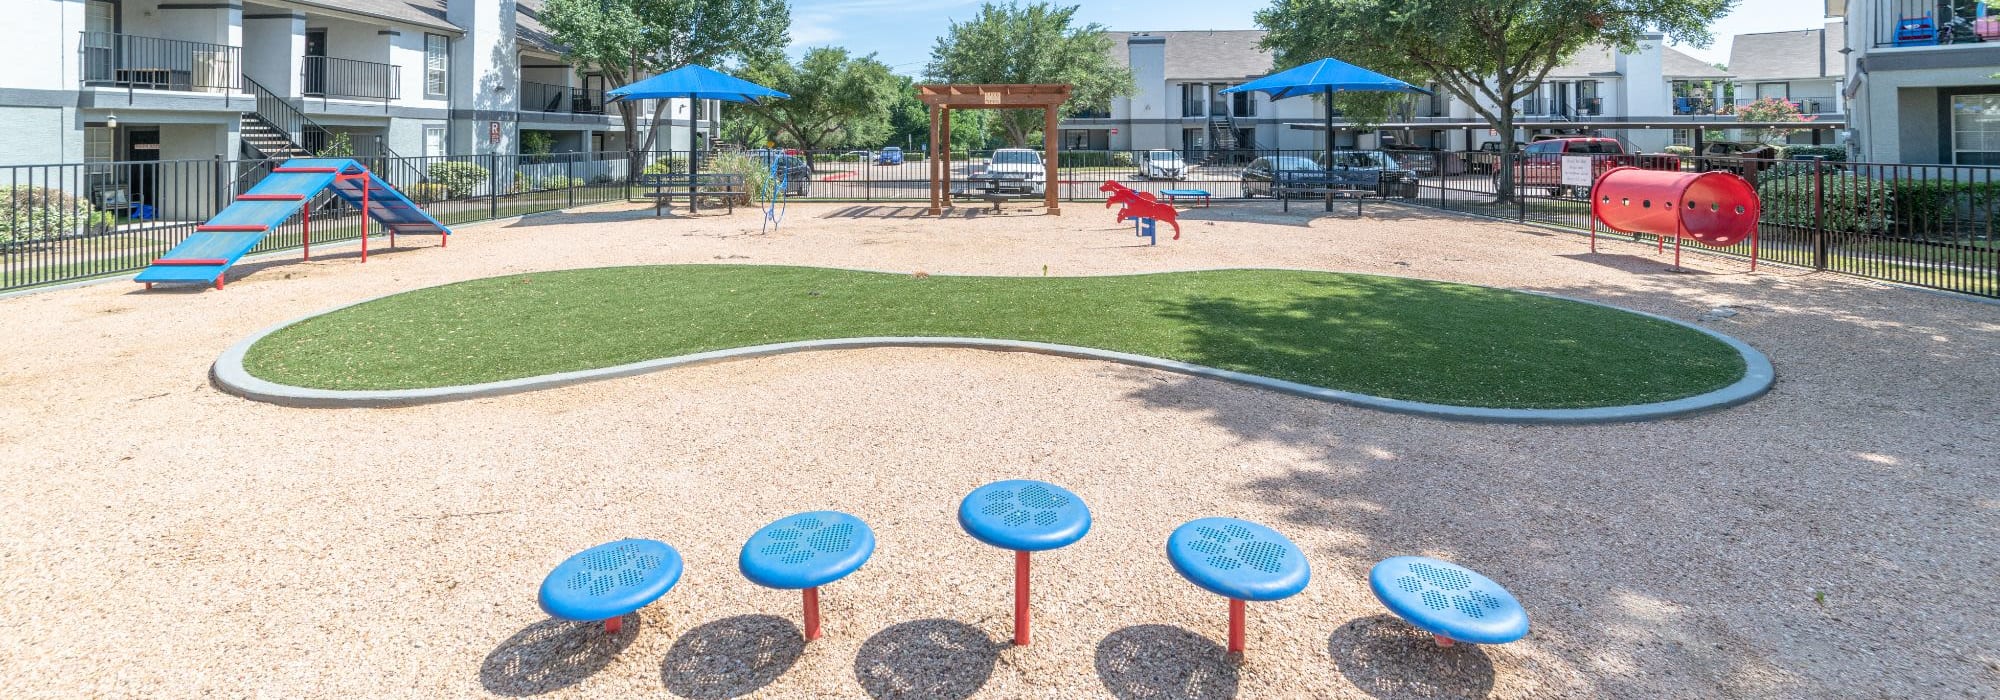 Dog park at The Rustic of McKinney in McKinney, Texas